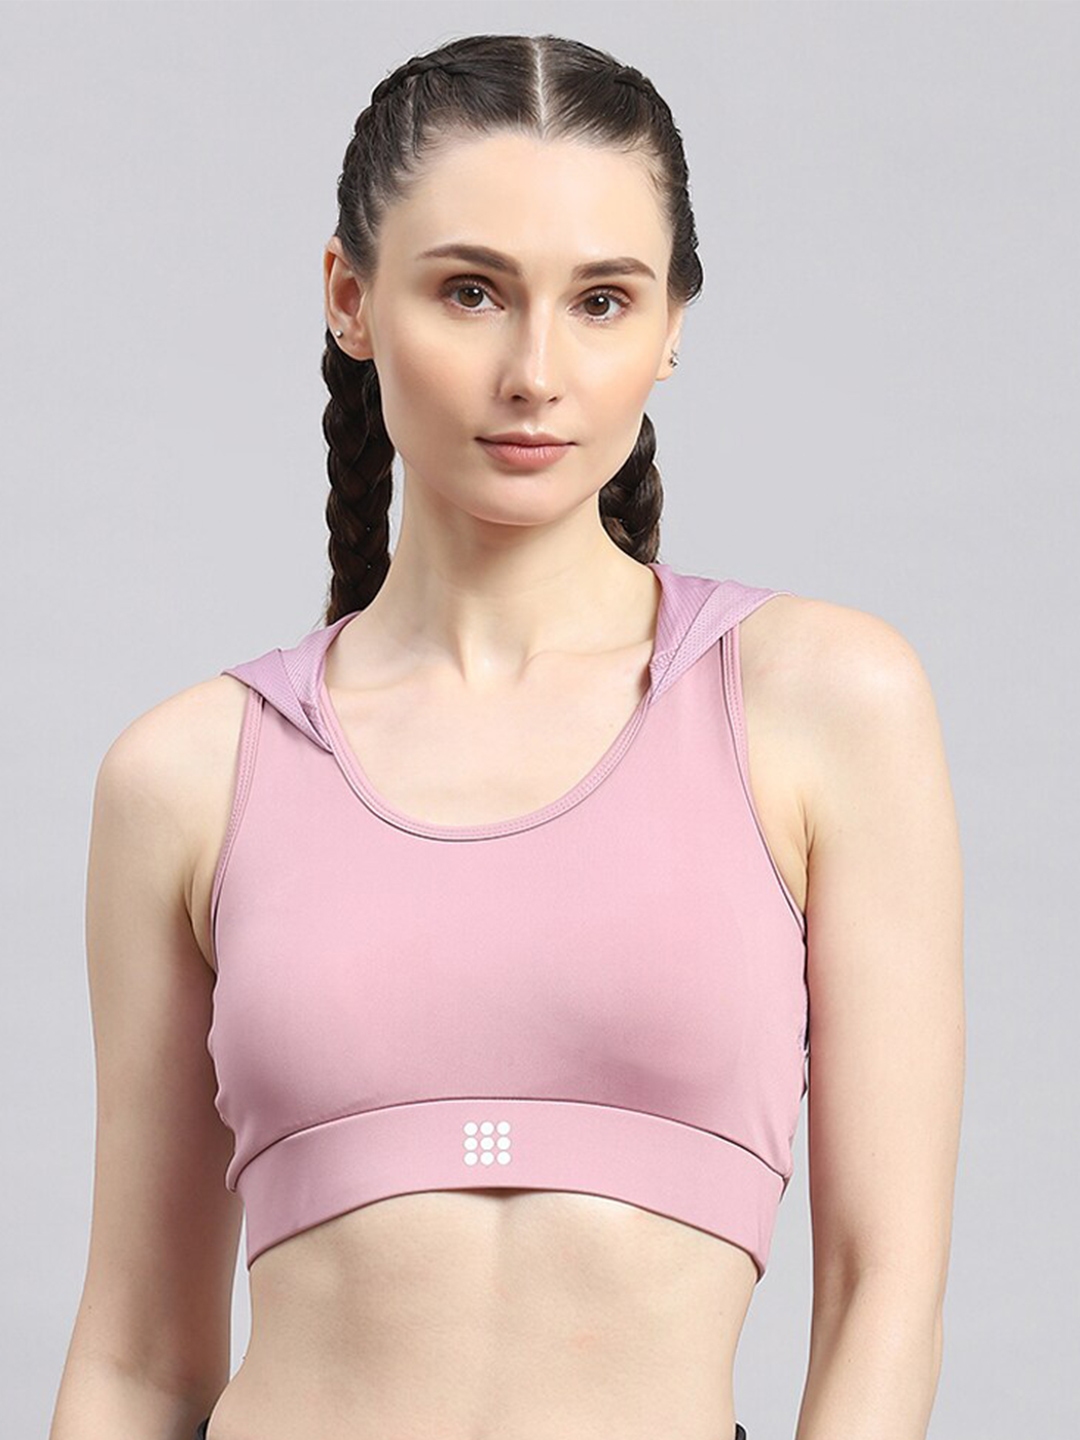 vimal Cotton Blend Ladies Sports Bras, For Inner Wear at Rs 60